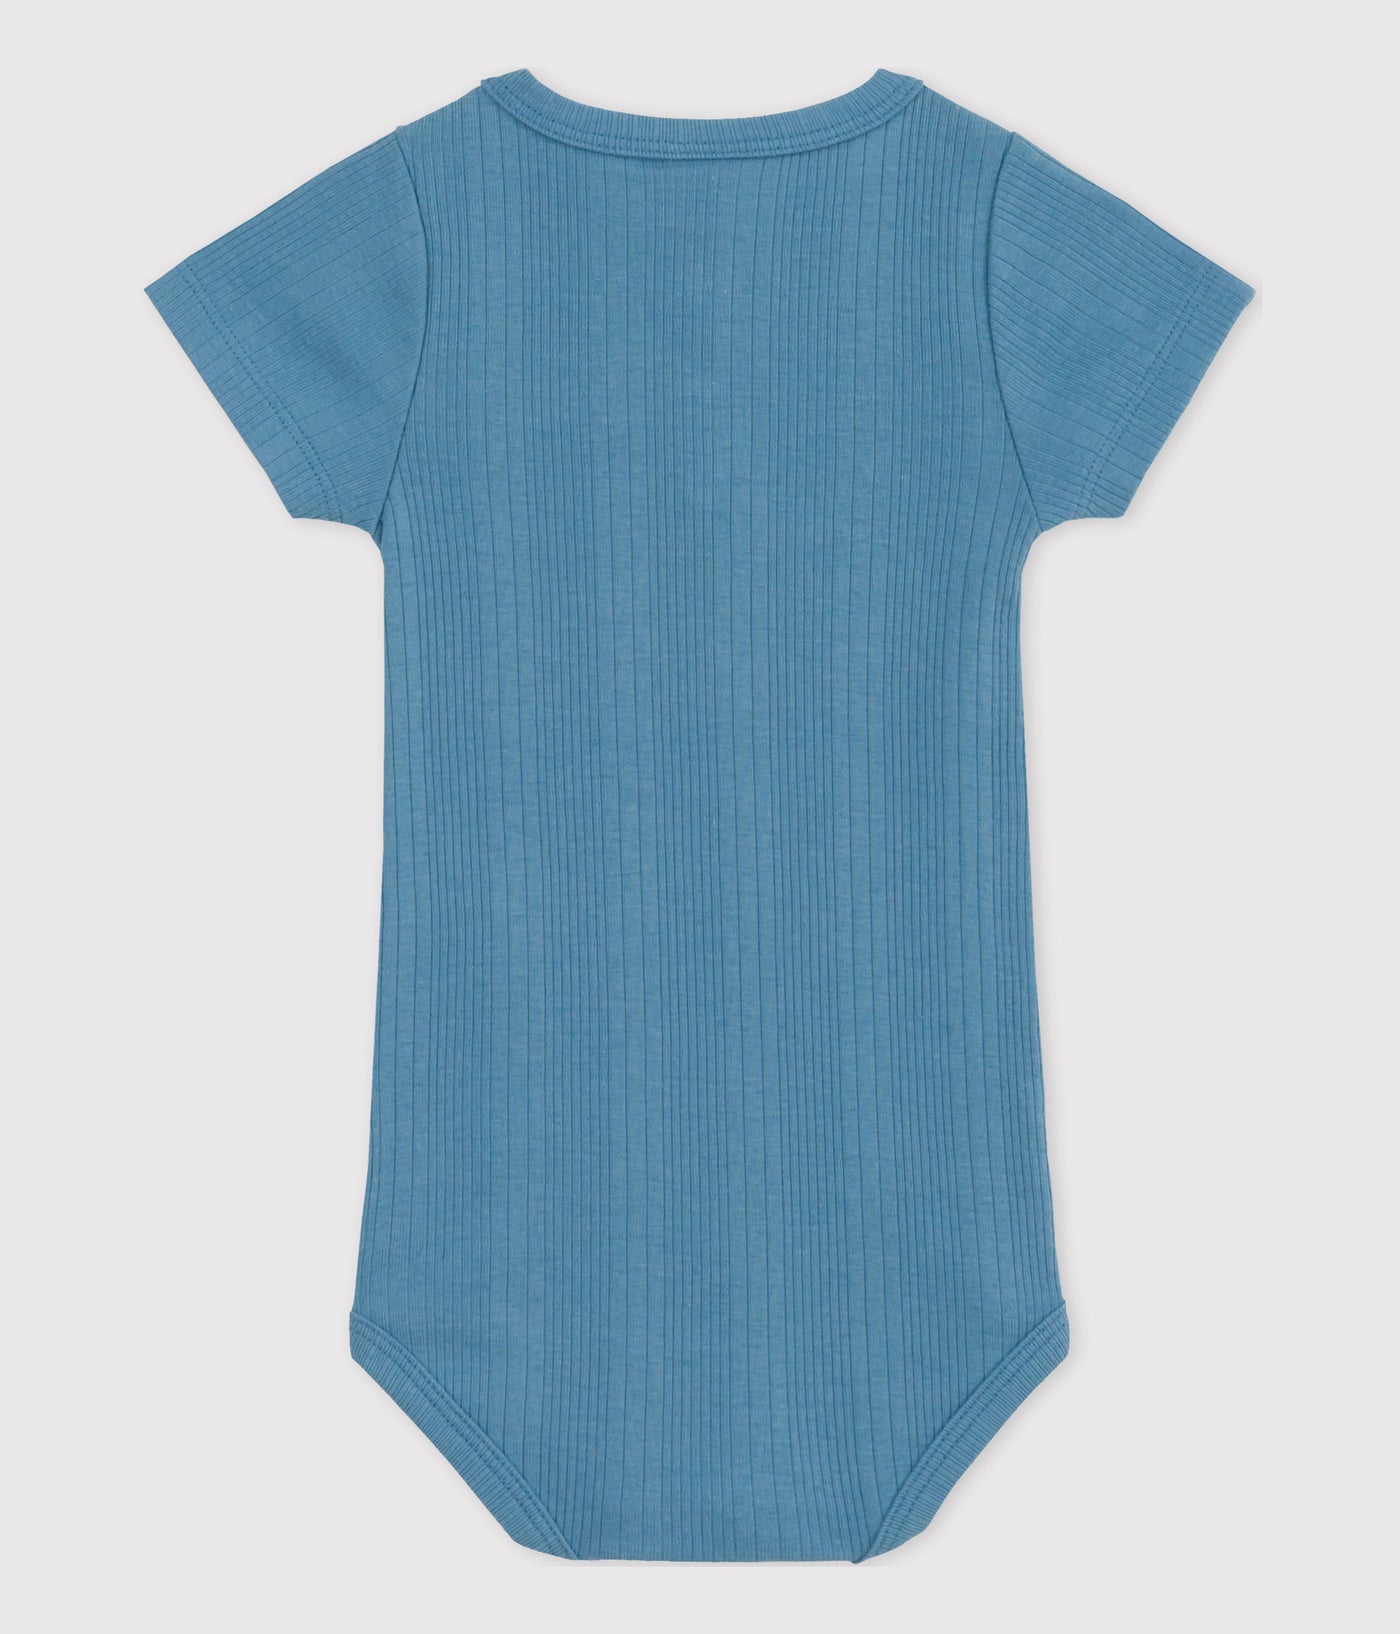 BABIES' SHORT-SLEEVED COTTON BODYSUIT WITH HENLEY NECK